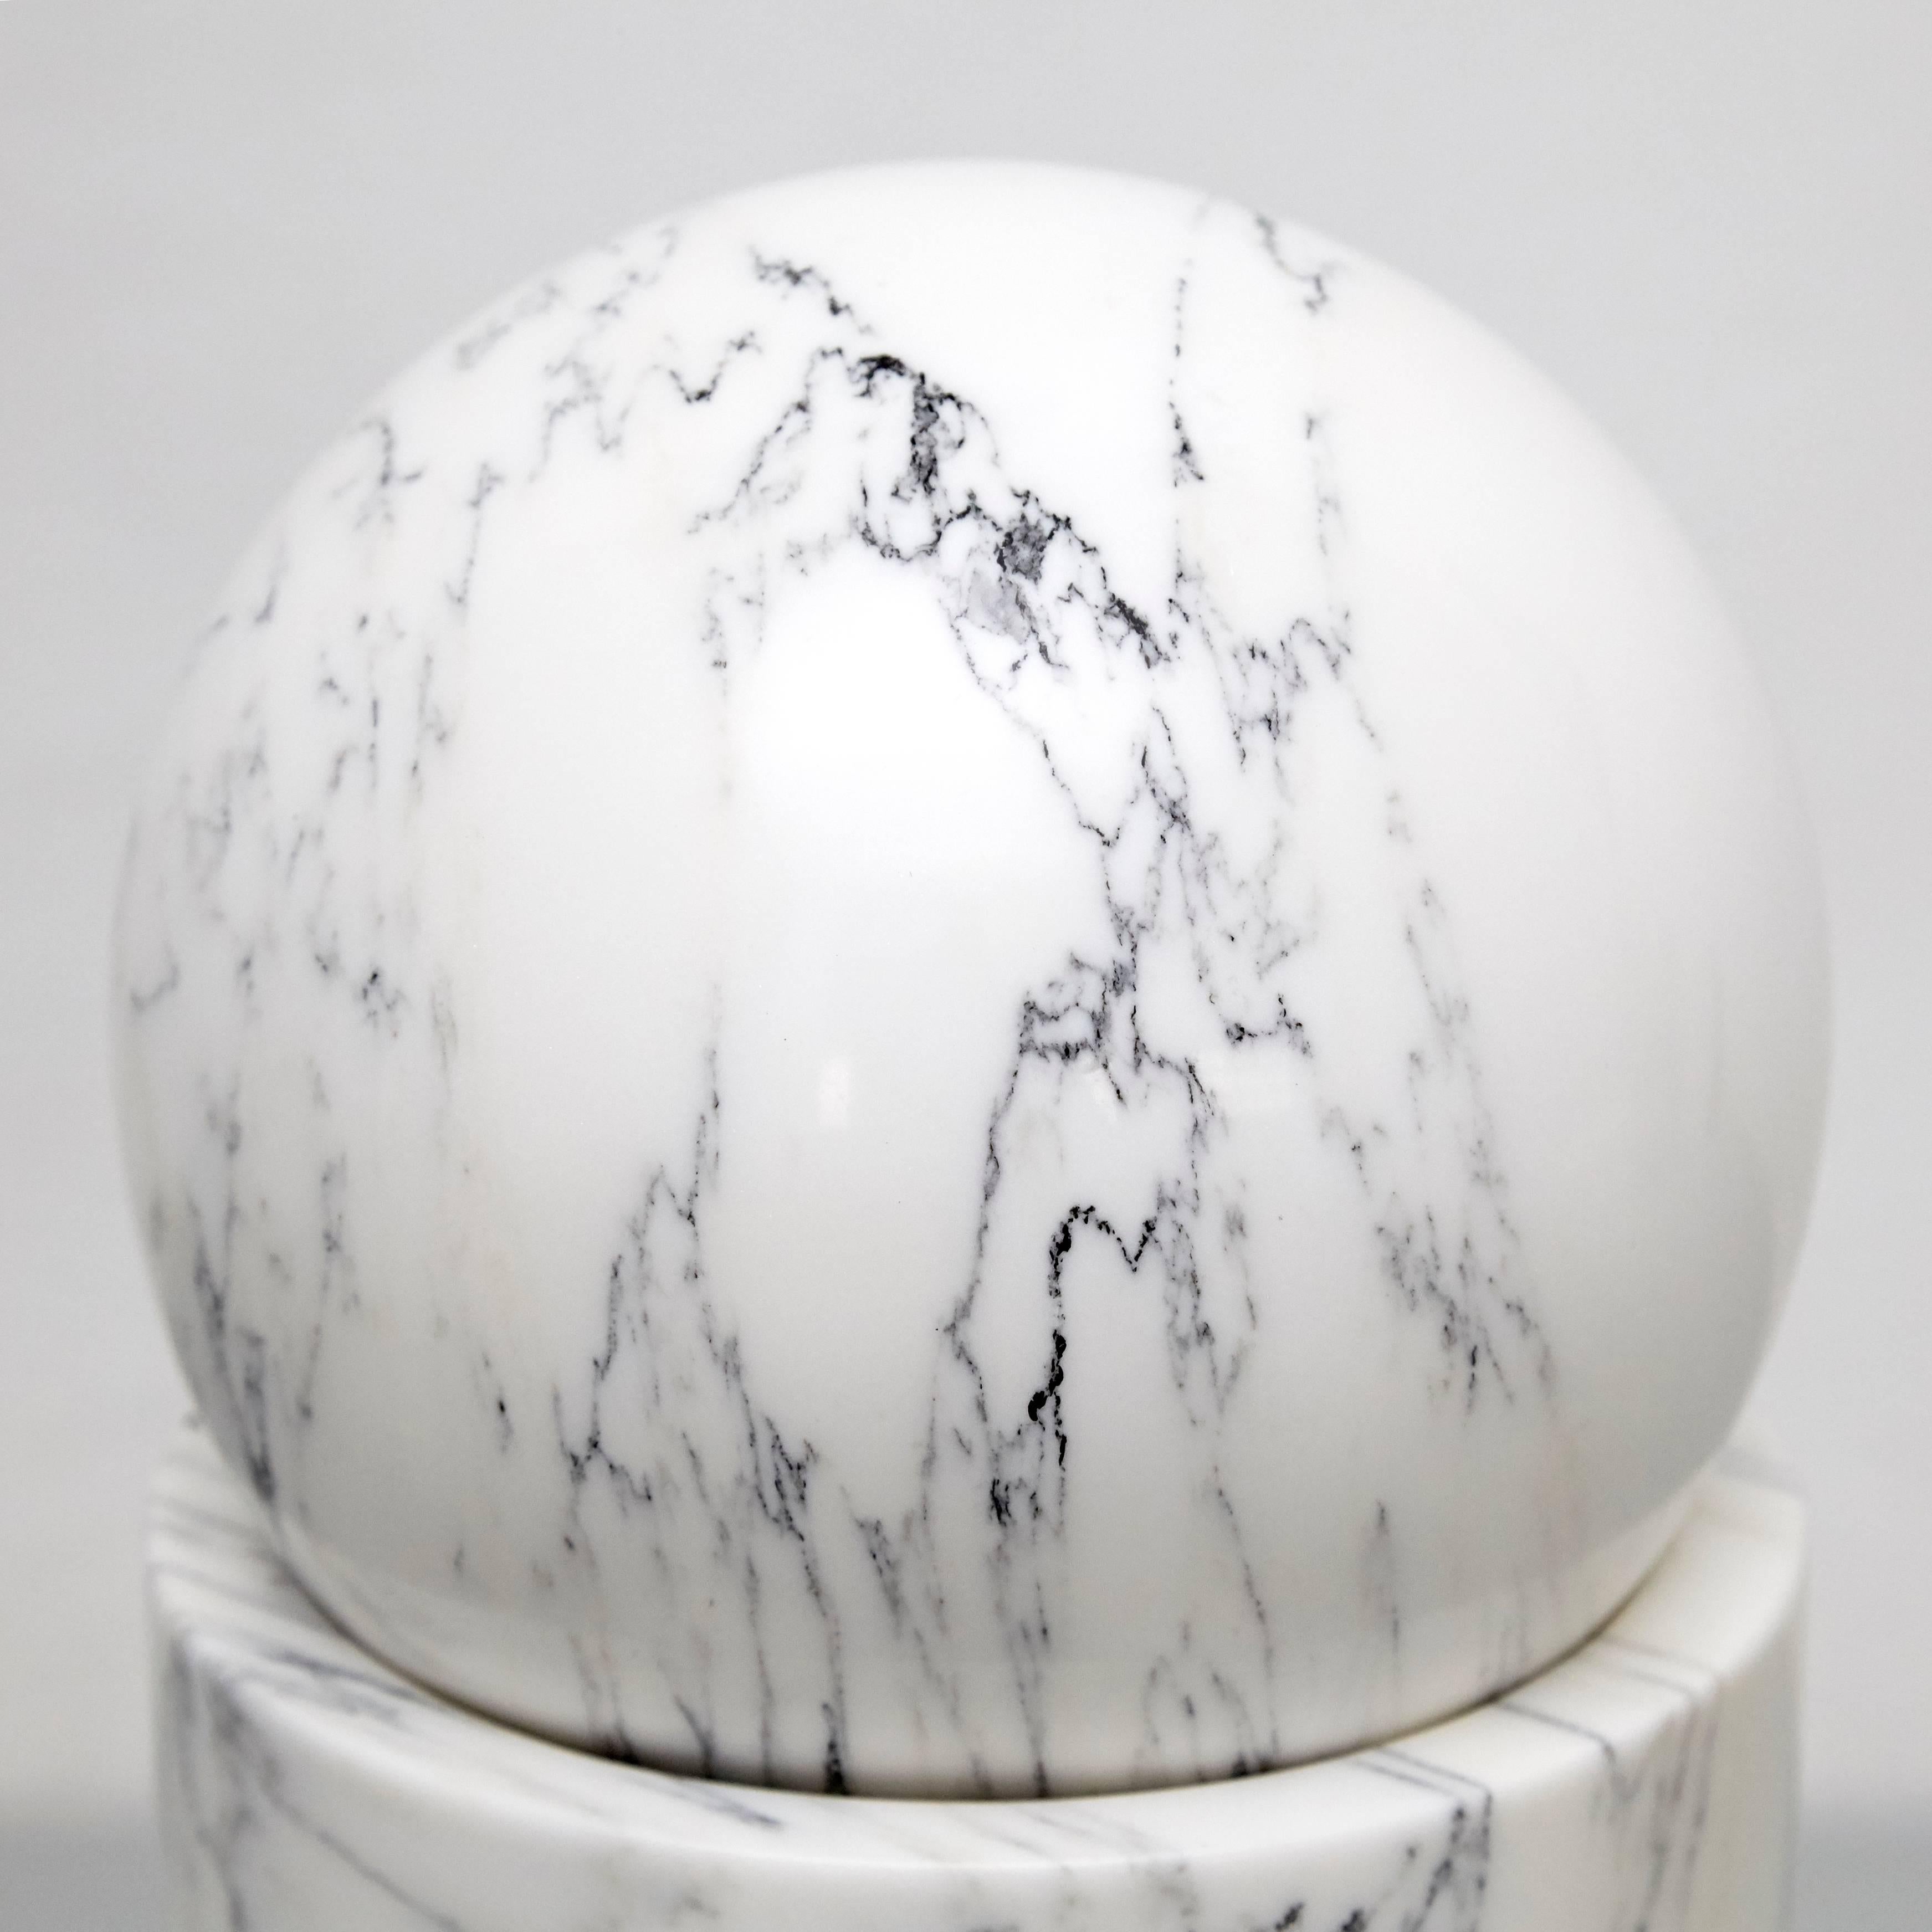 Marble sculpture designed by Man Ray in 1920 and made in 1972 by the artist.

Signed and numbered 114/500.

Man Ray (1890–1976) was an American visual artist who spent most of his career in France. He was a significant contributor to the Dada